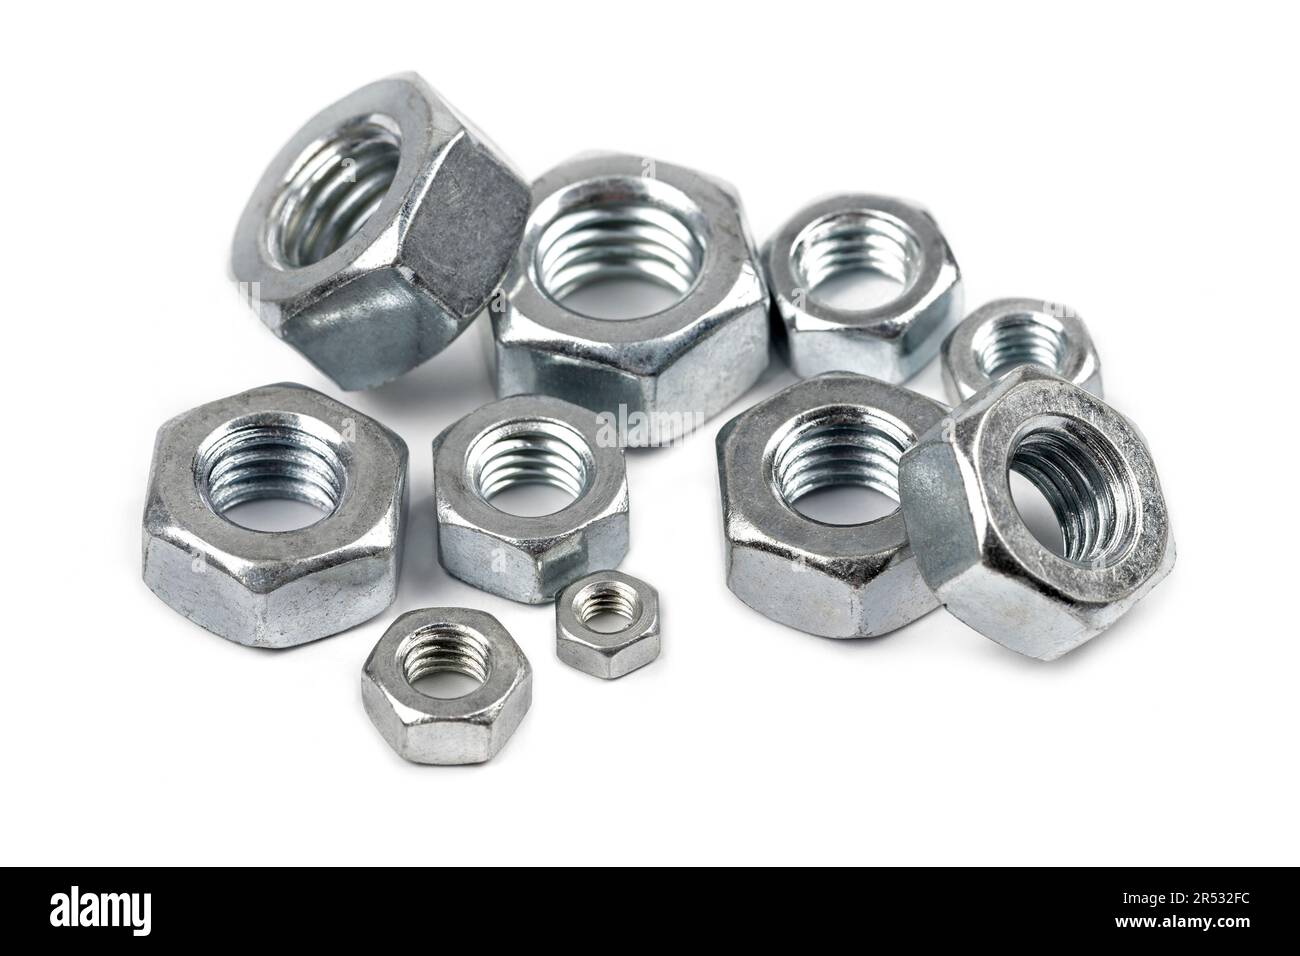 Close-up of steel screw nuts in different sizes on white background Stock Photo